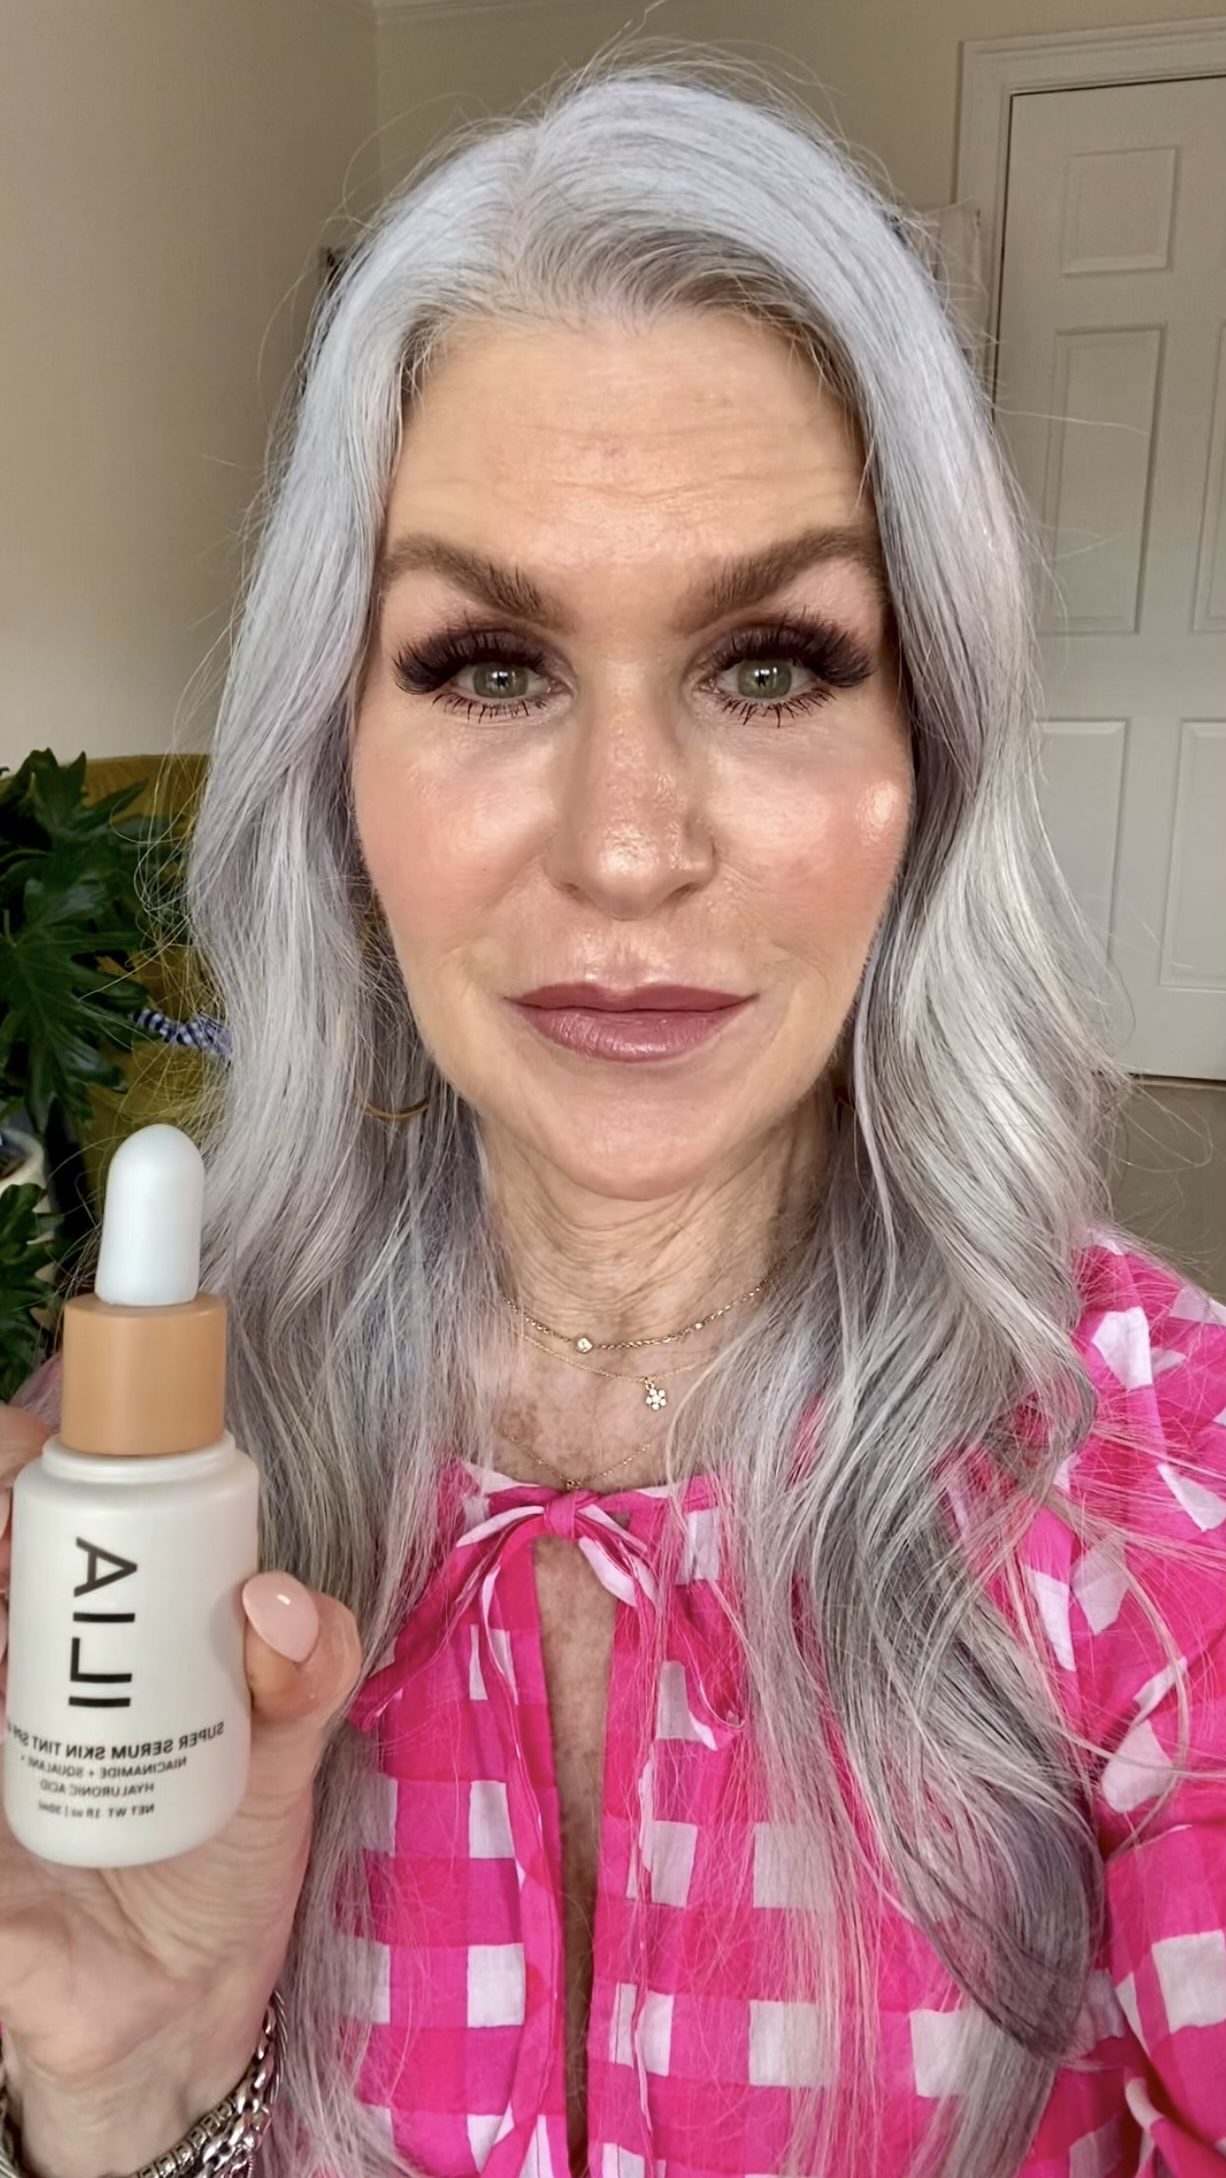 Silver hair lady holding lila makeup